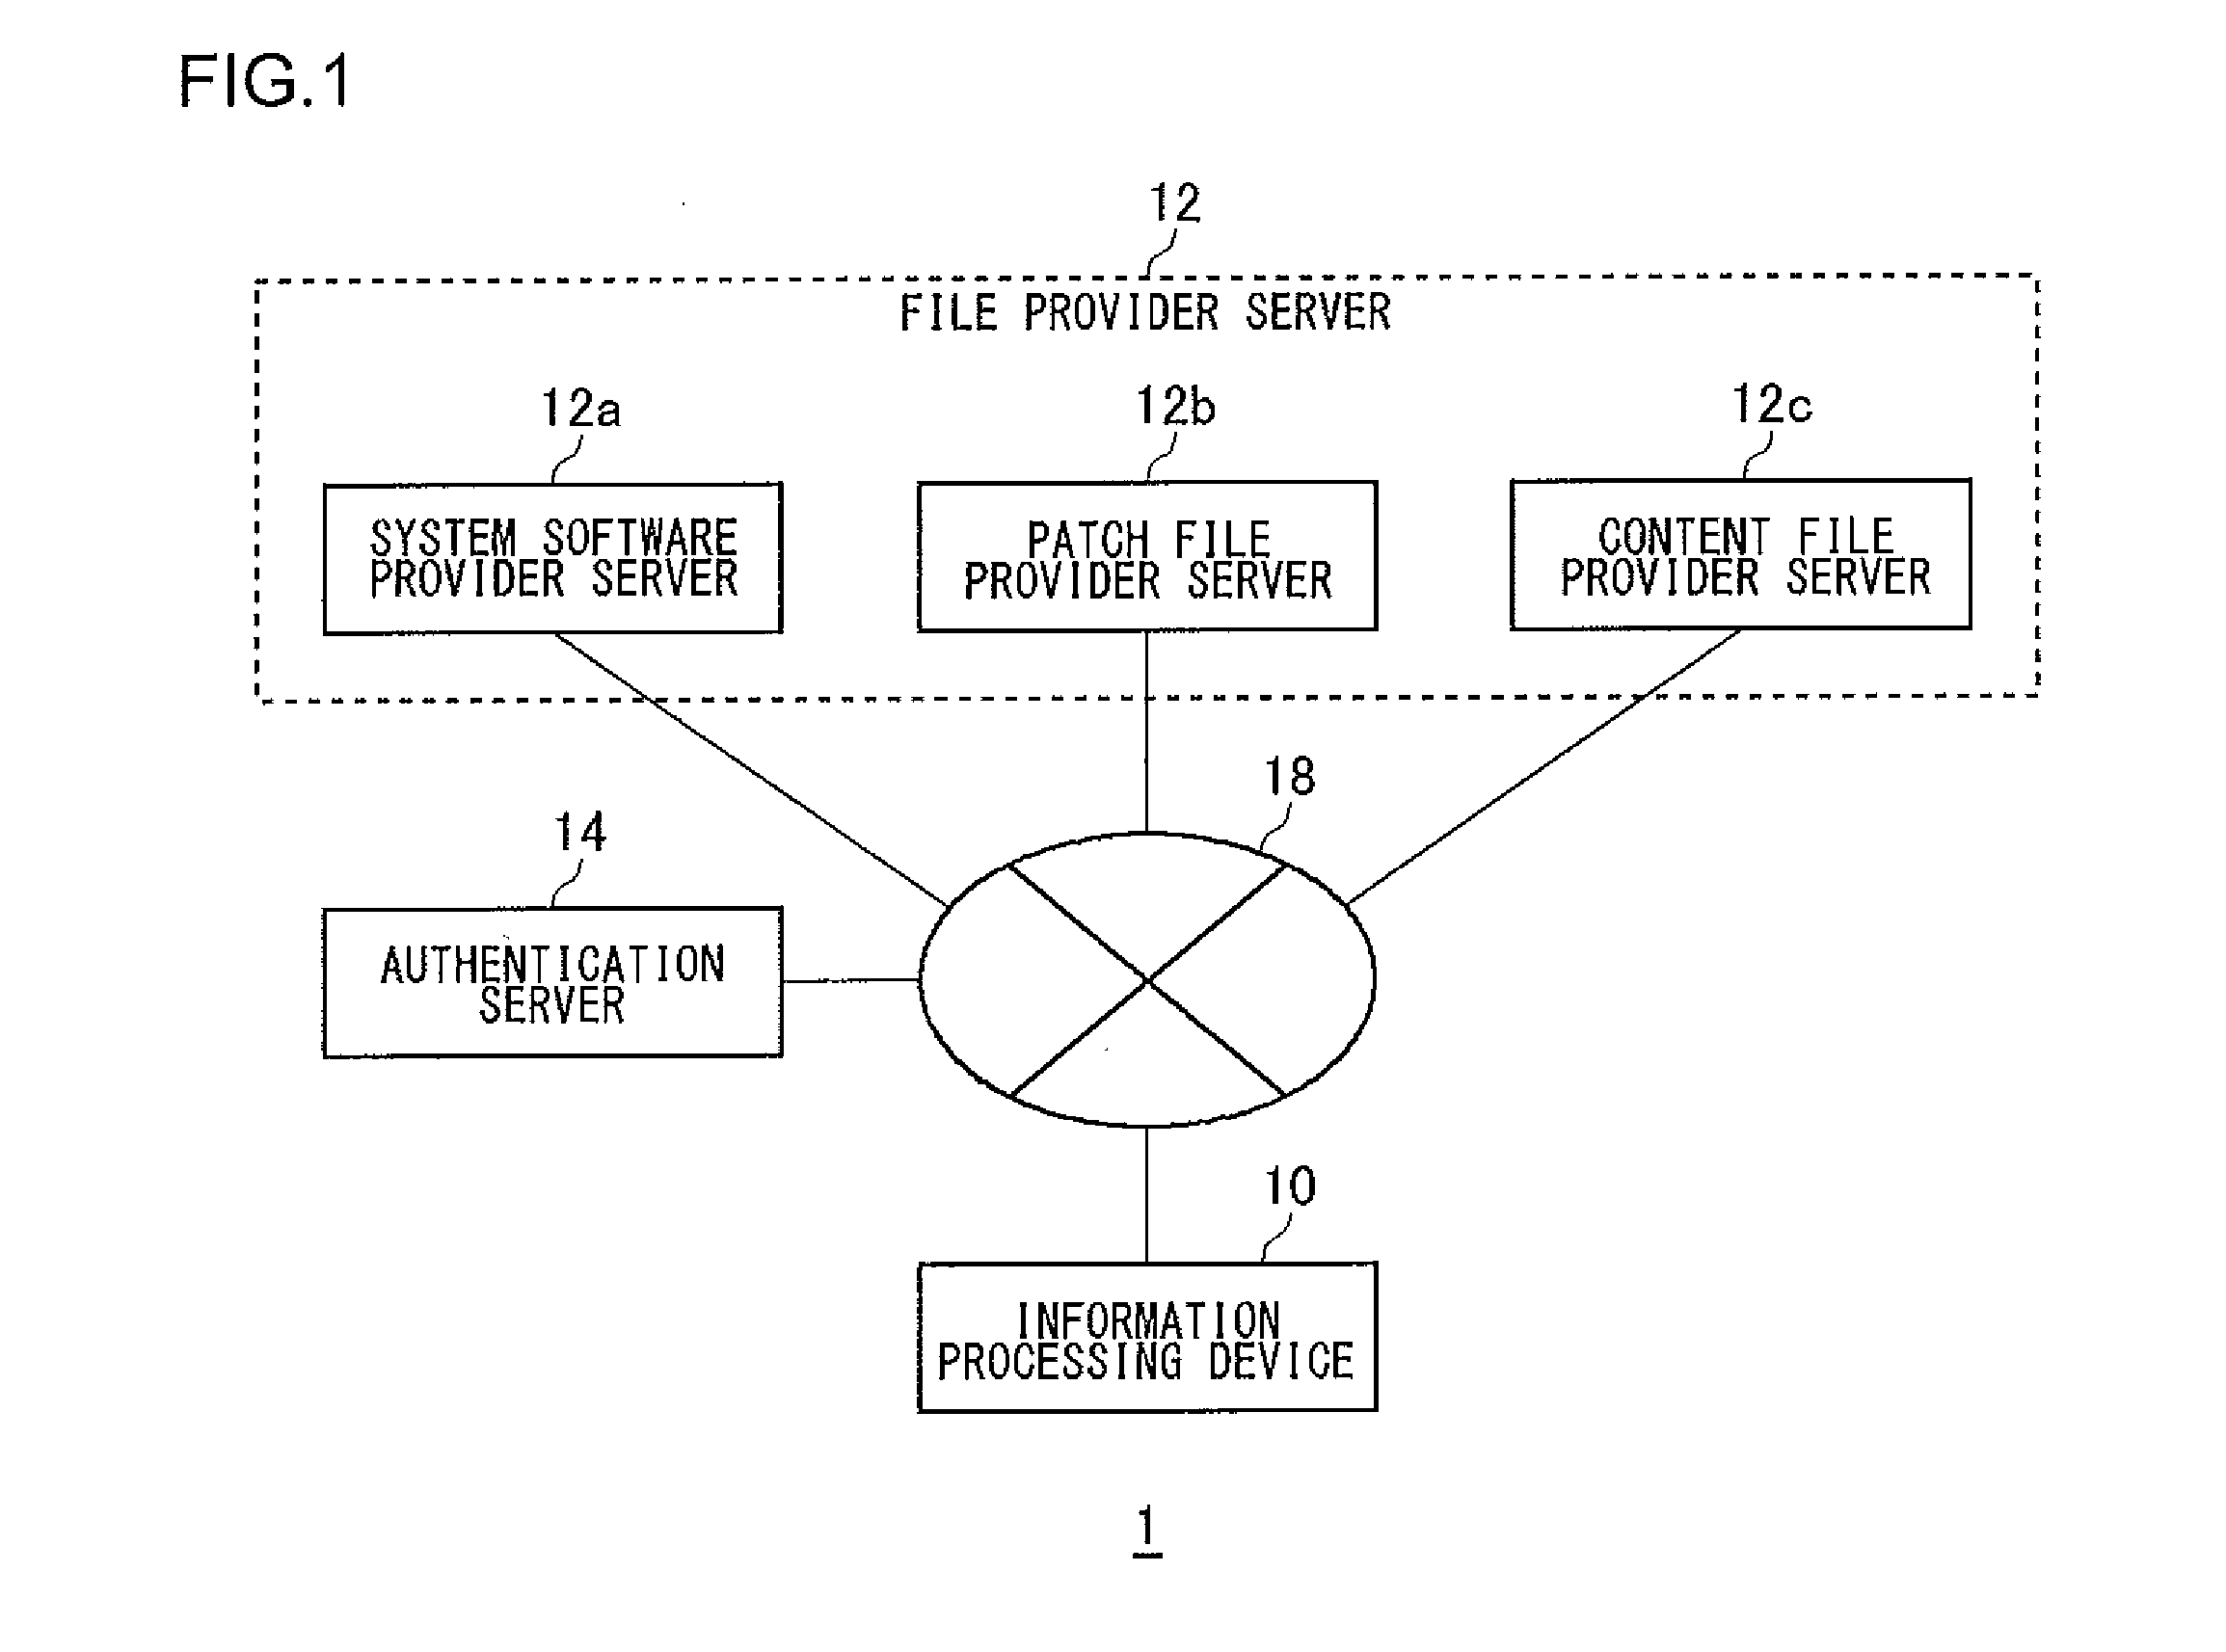 Information Processing Device